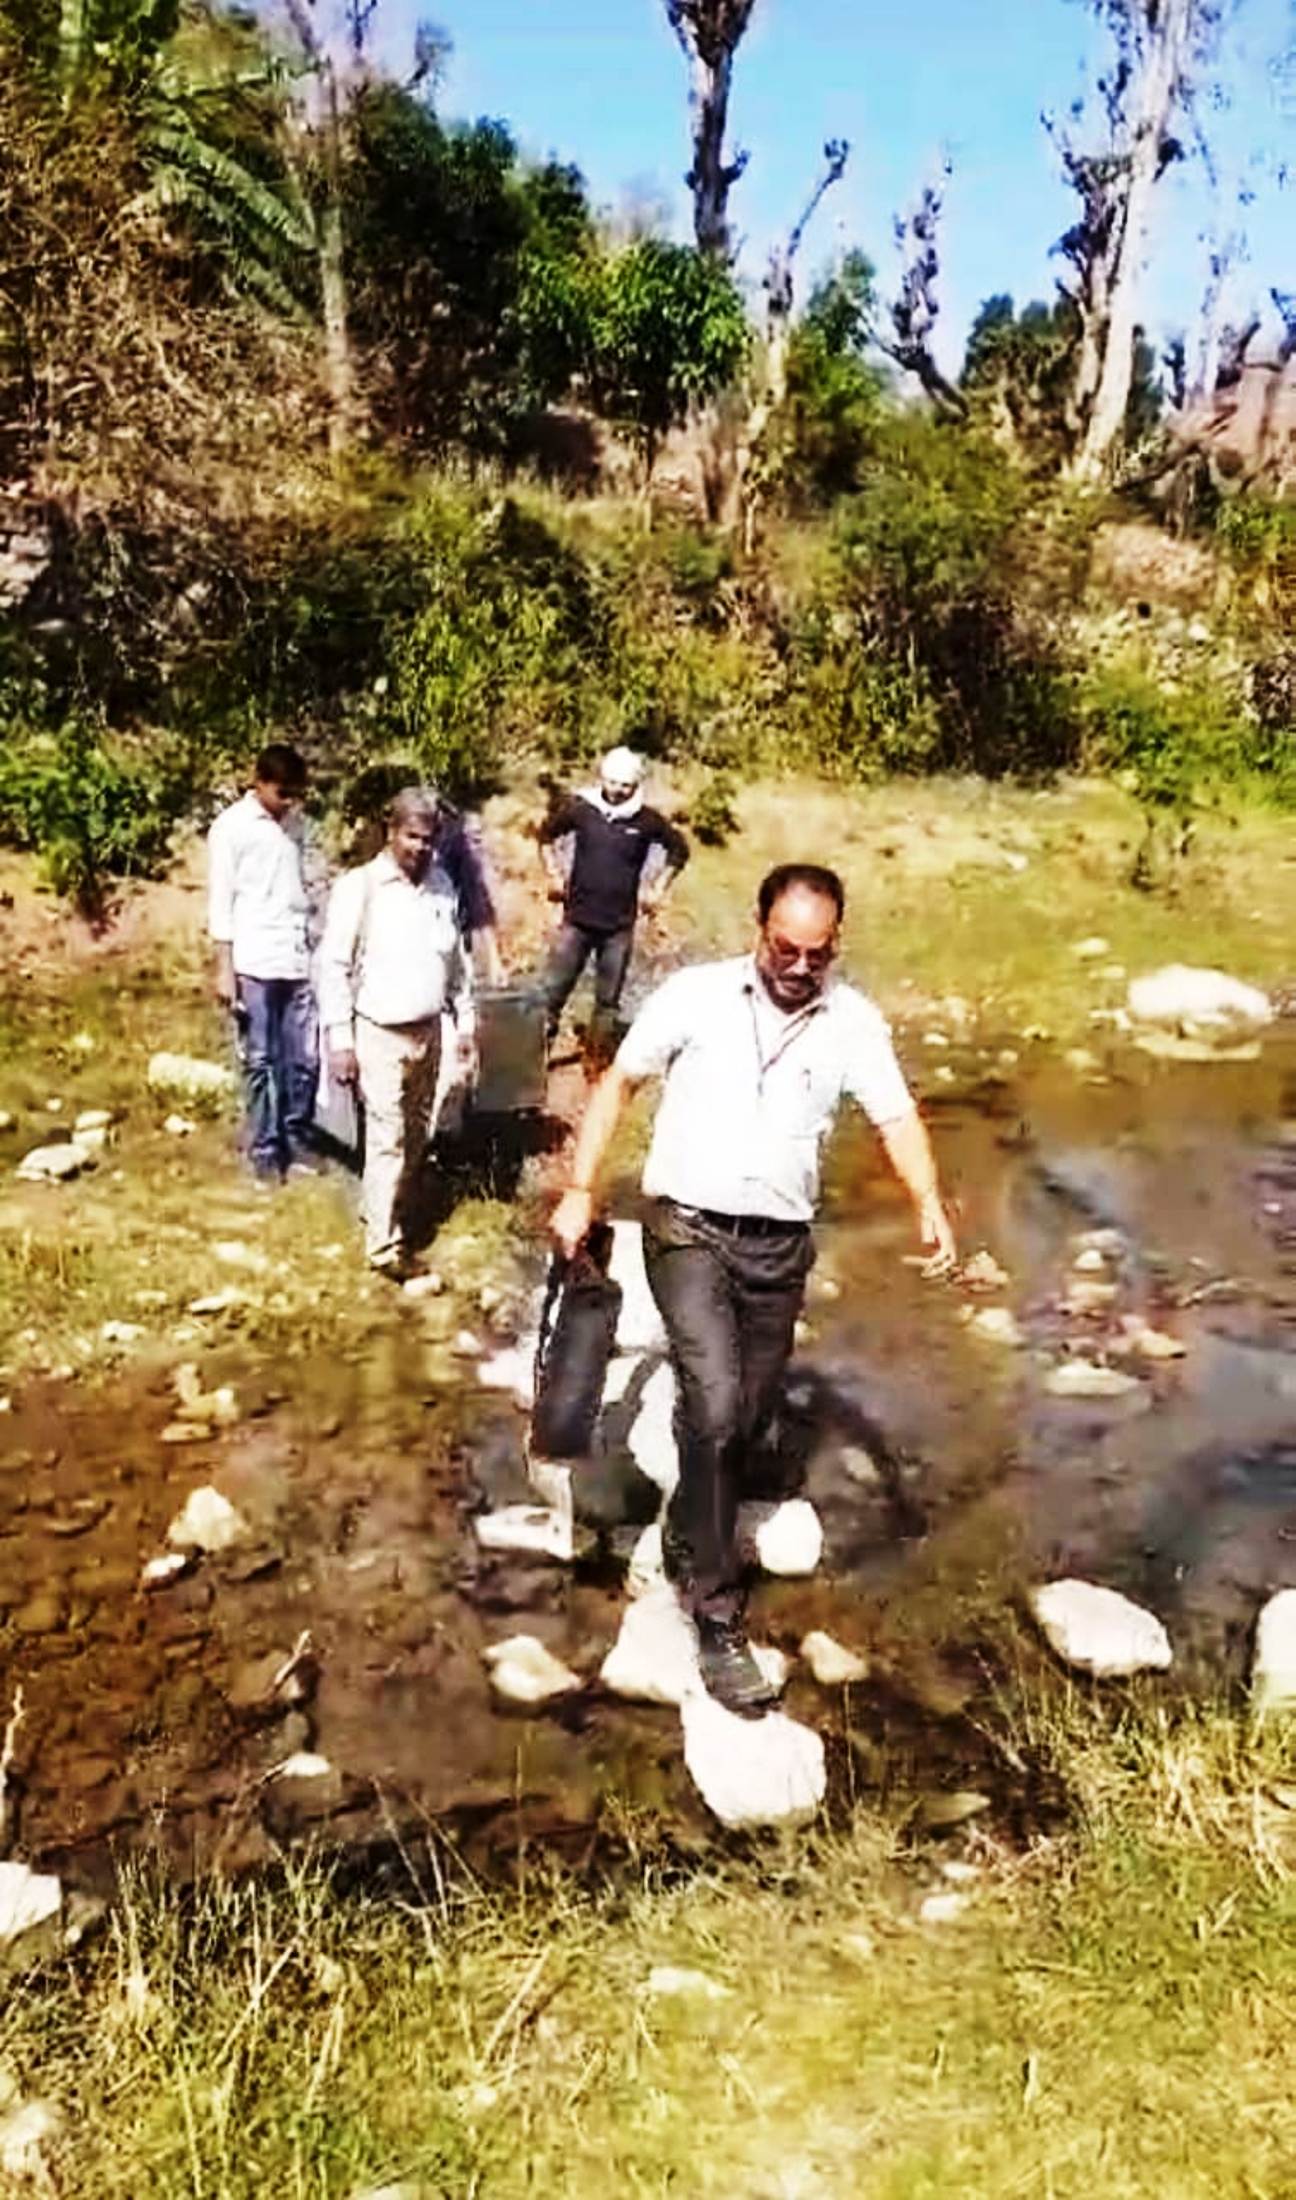 Dedicated Polling Teams Cross Rivers Amidst Jungles to Reach Voters' Homes